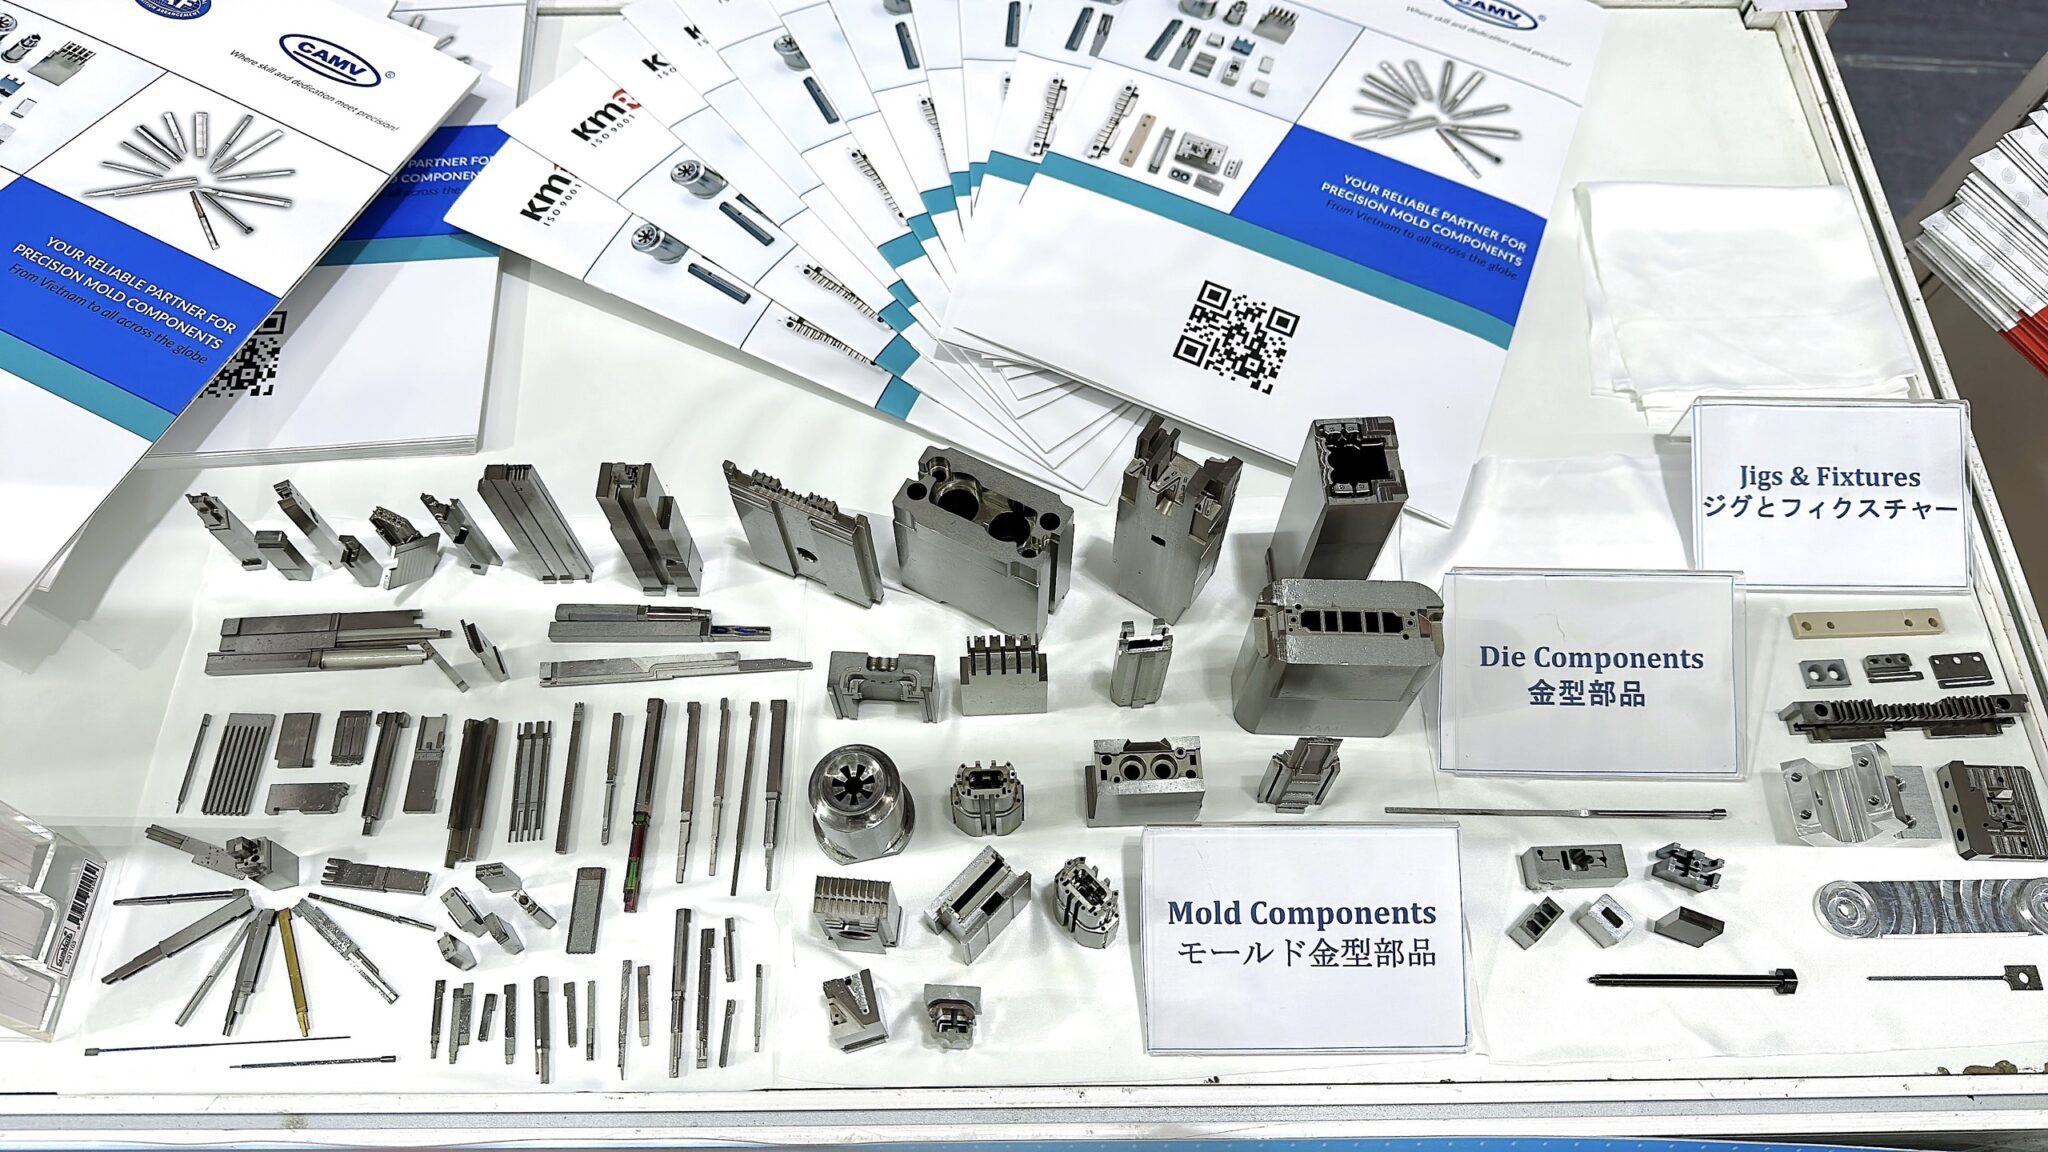 CAM Resources mold and die components put on display at a trade expo